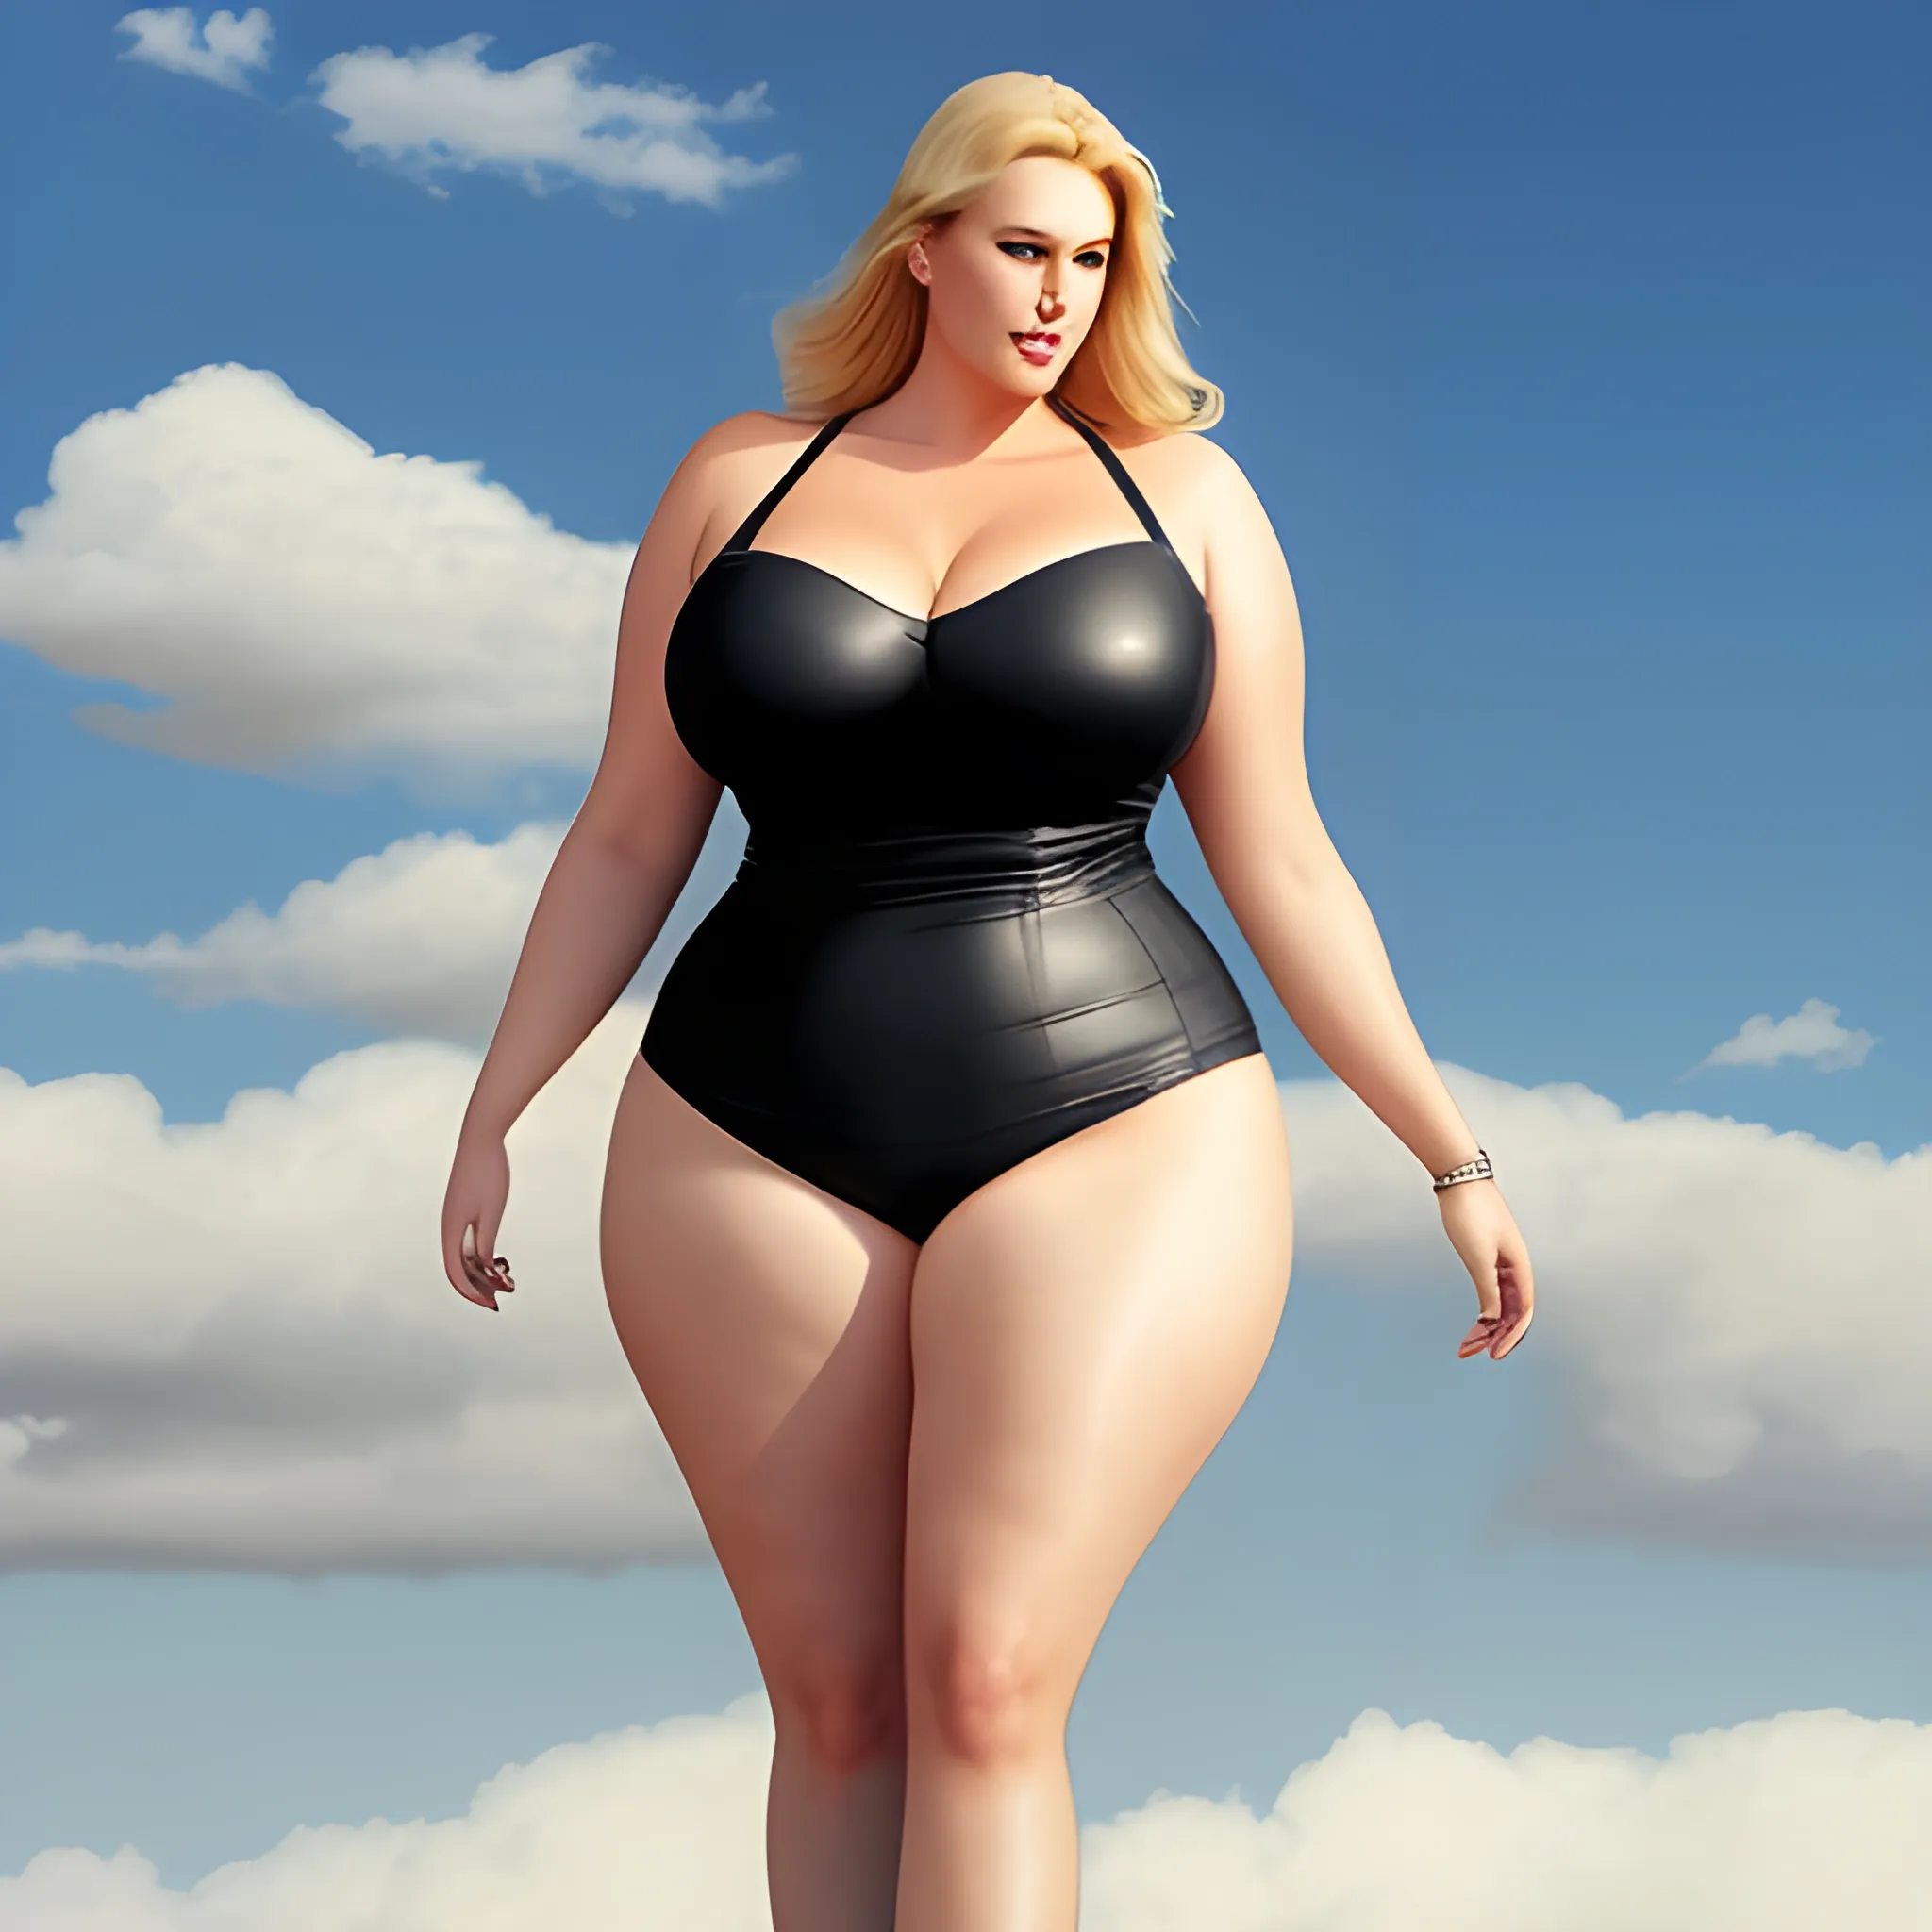 large and tall blonde plus size, not curvy, blonde young girl wi